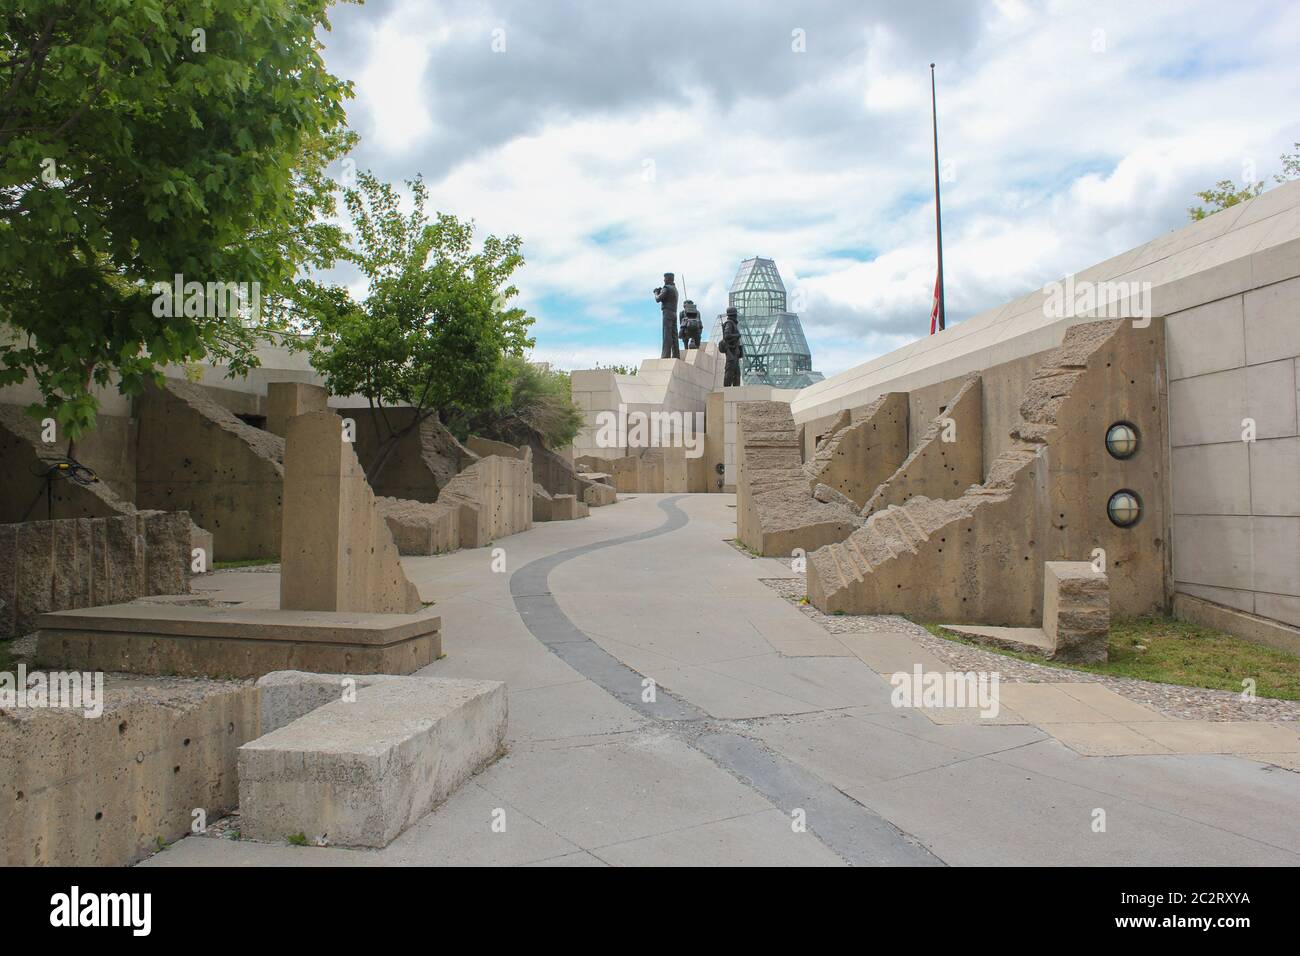 The Peacekeeping monument close to National Gallery of Canada, Ottawa, Canada Stock Photo